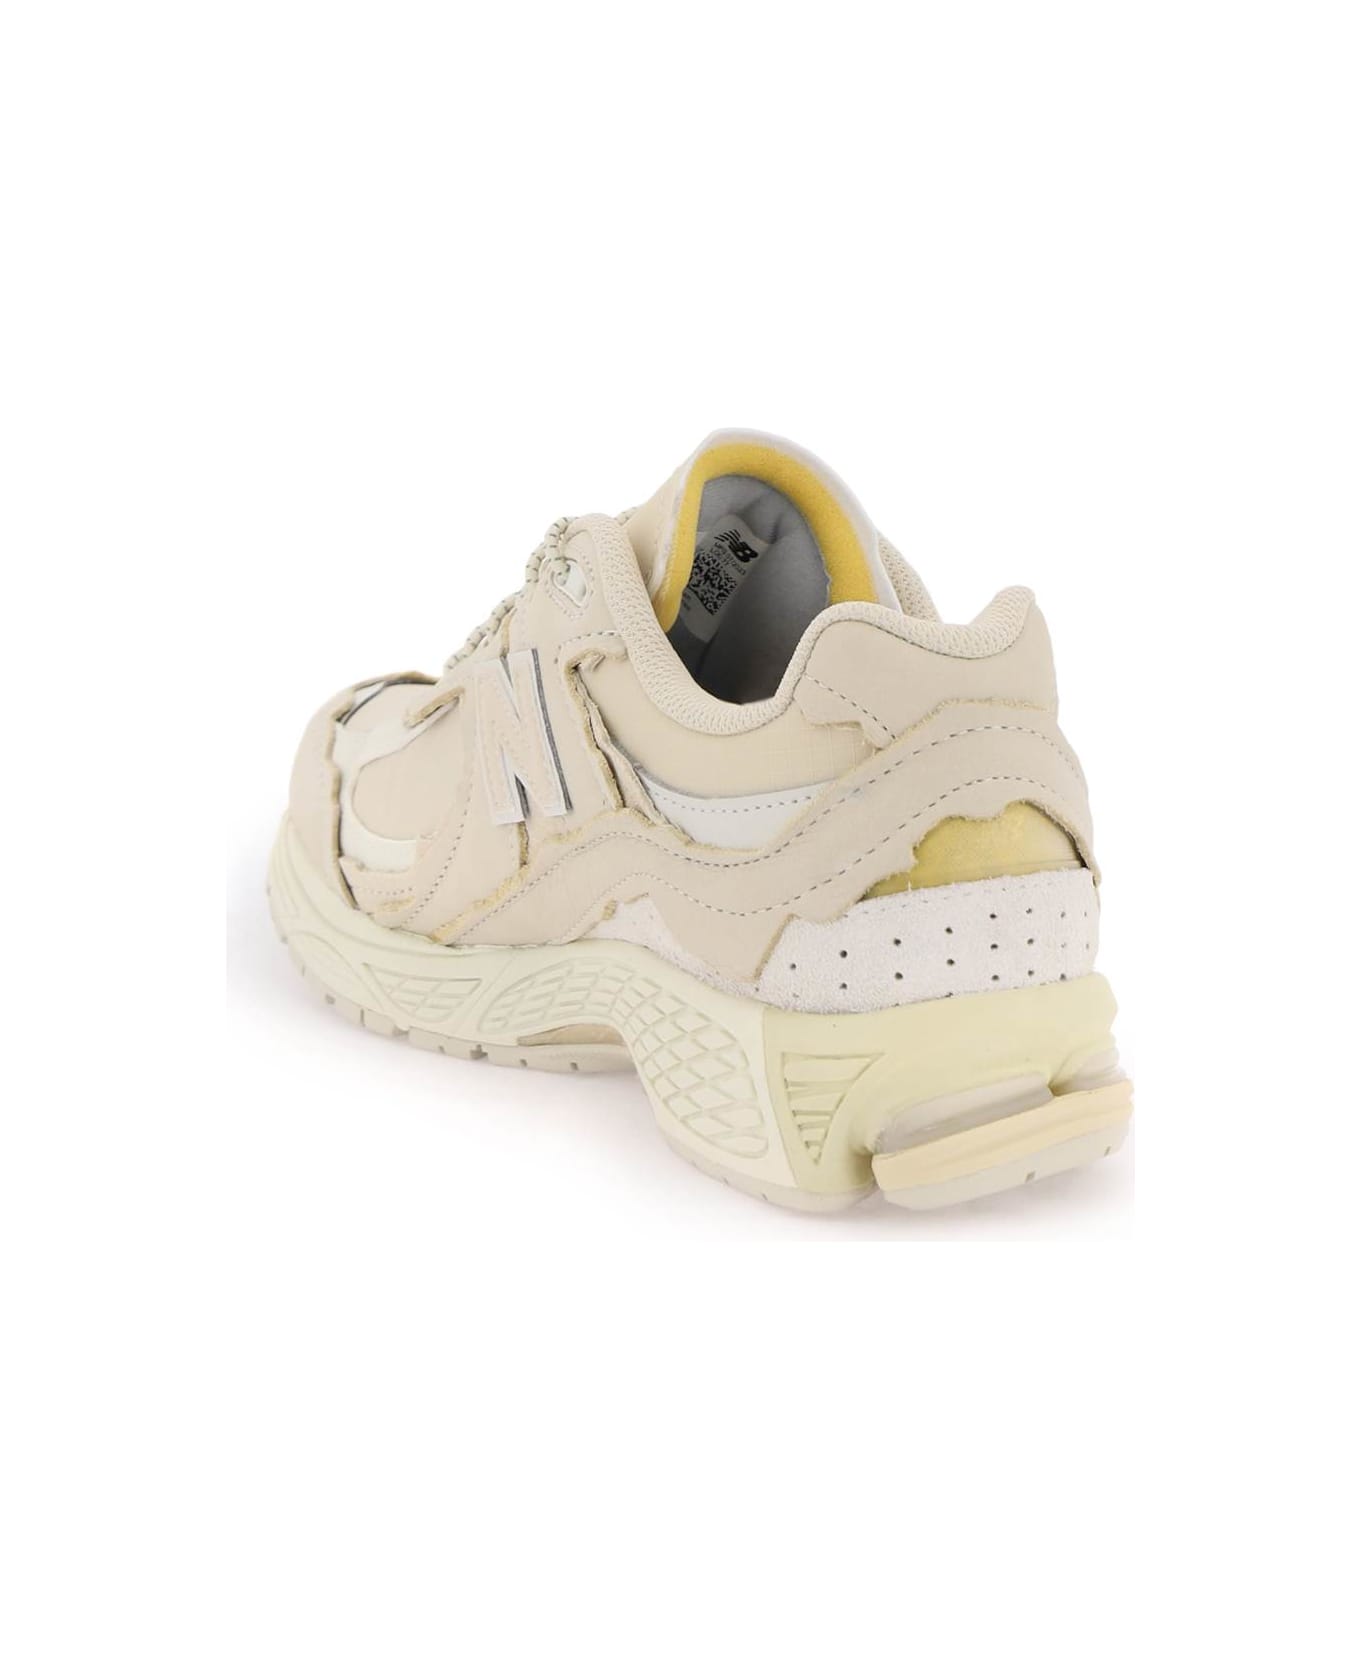 New Balance 2002rd Sneakers - SAND STONE (Beige)